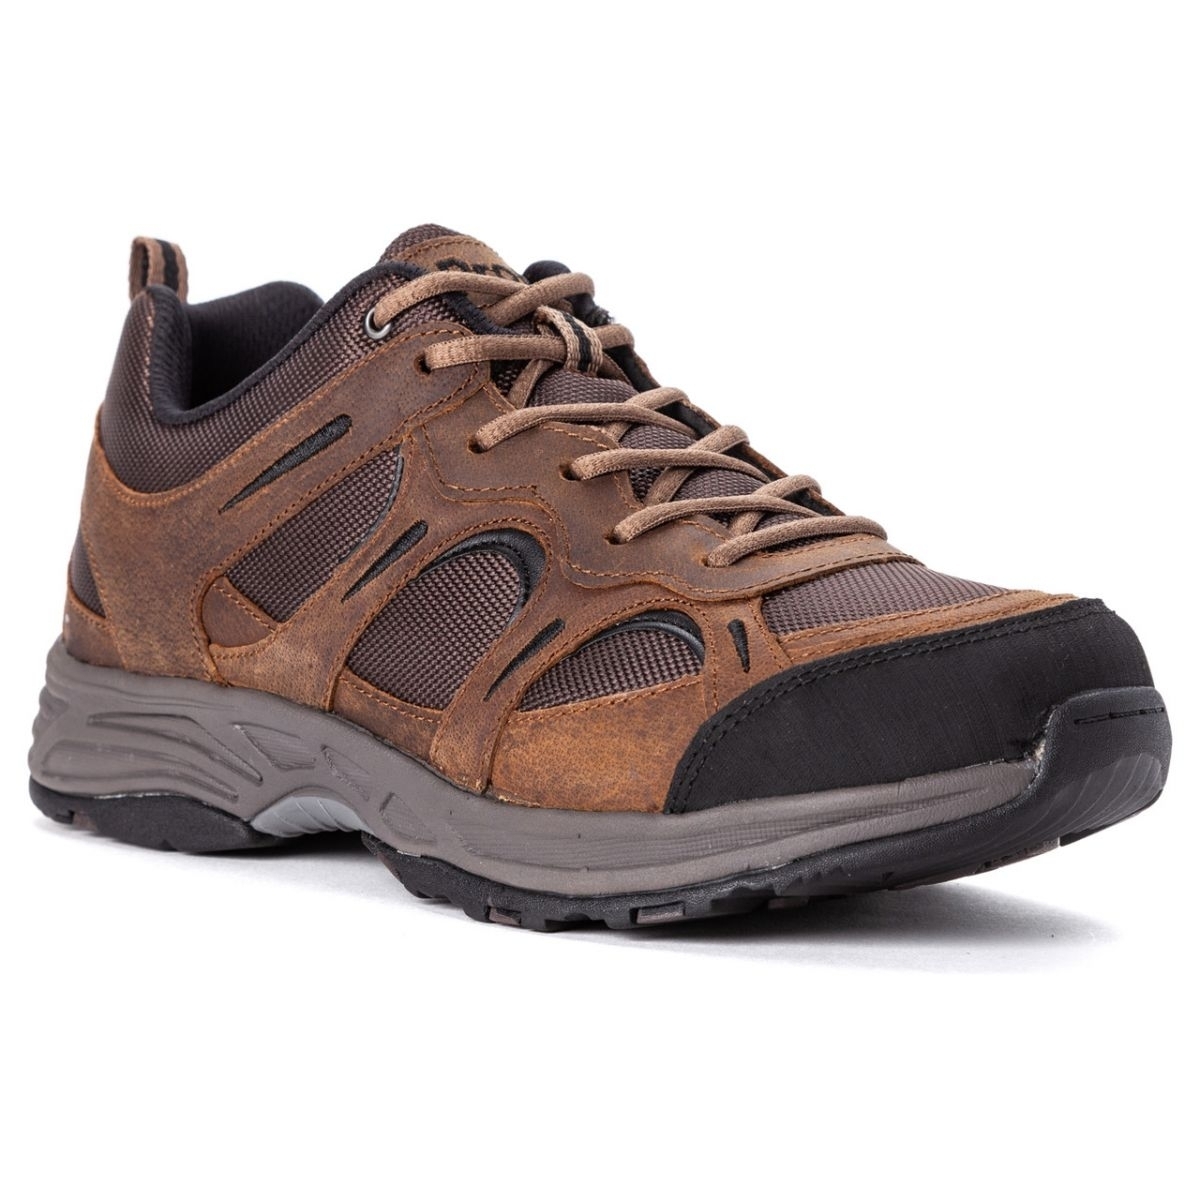 Propet Men's Connelly Hiking Shoe Brown - M5503BR BROWN - BROWN, 8.5-D